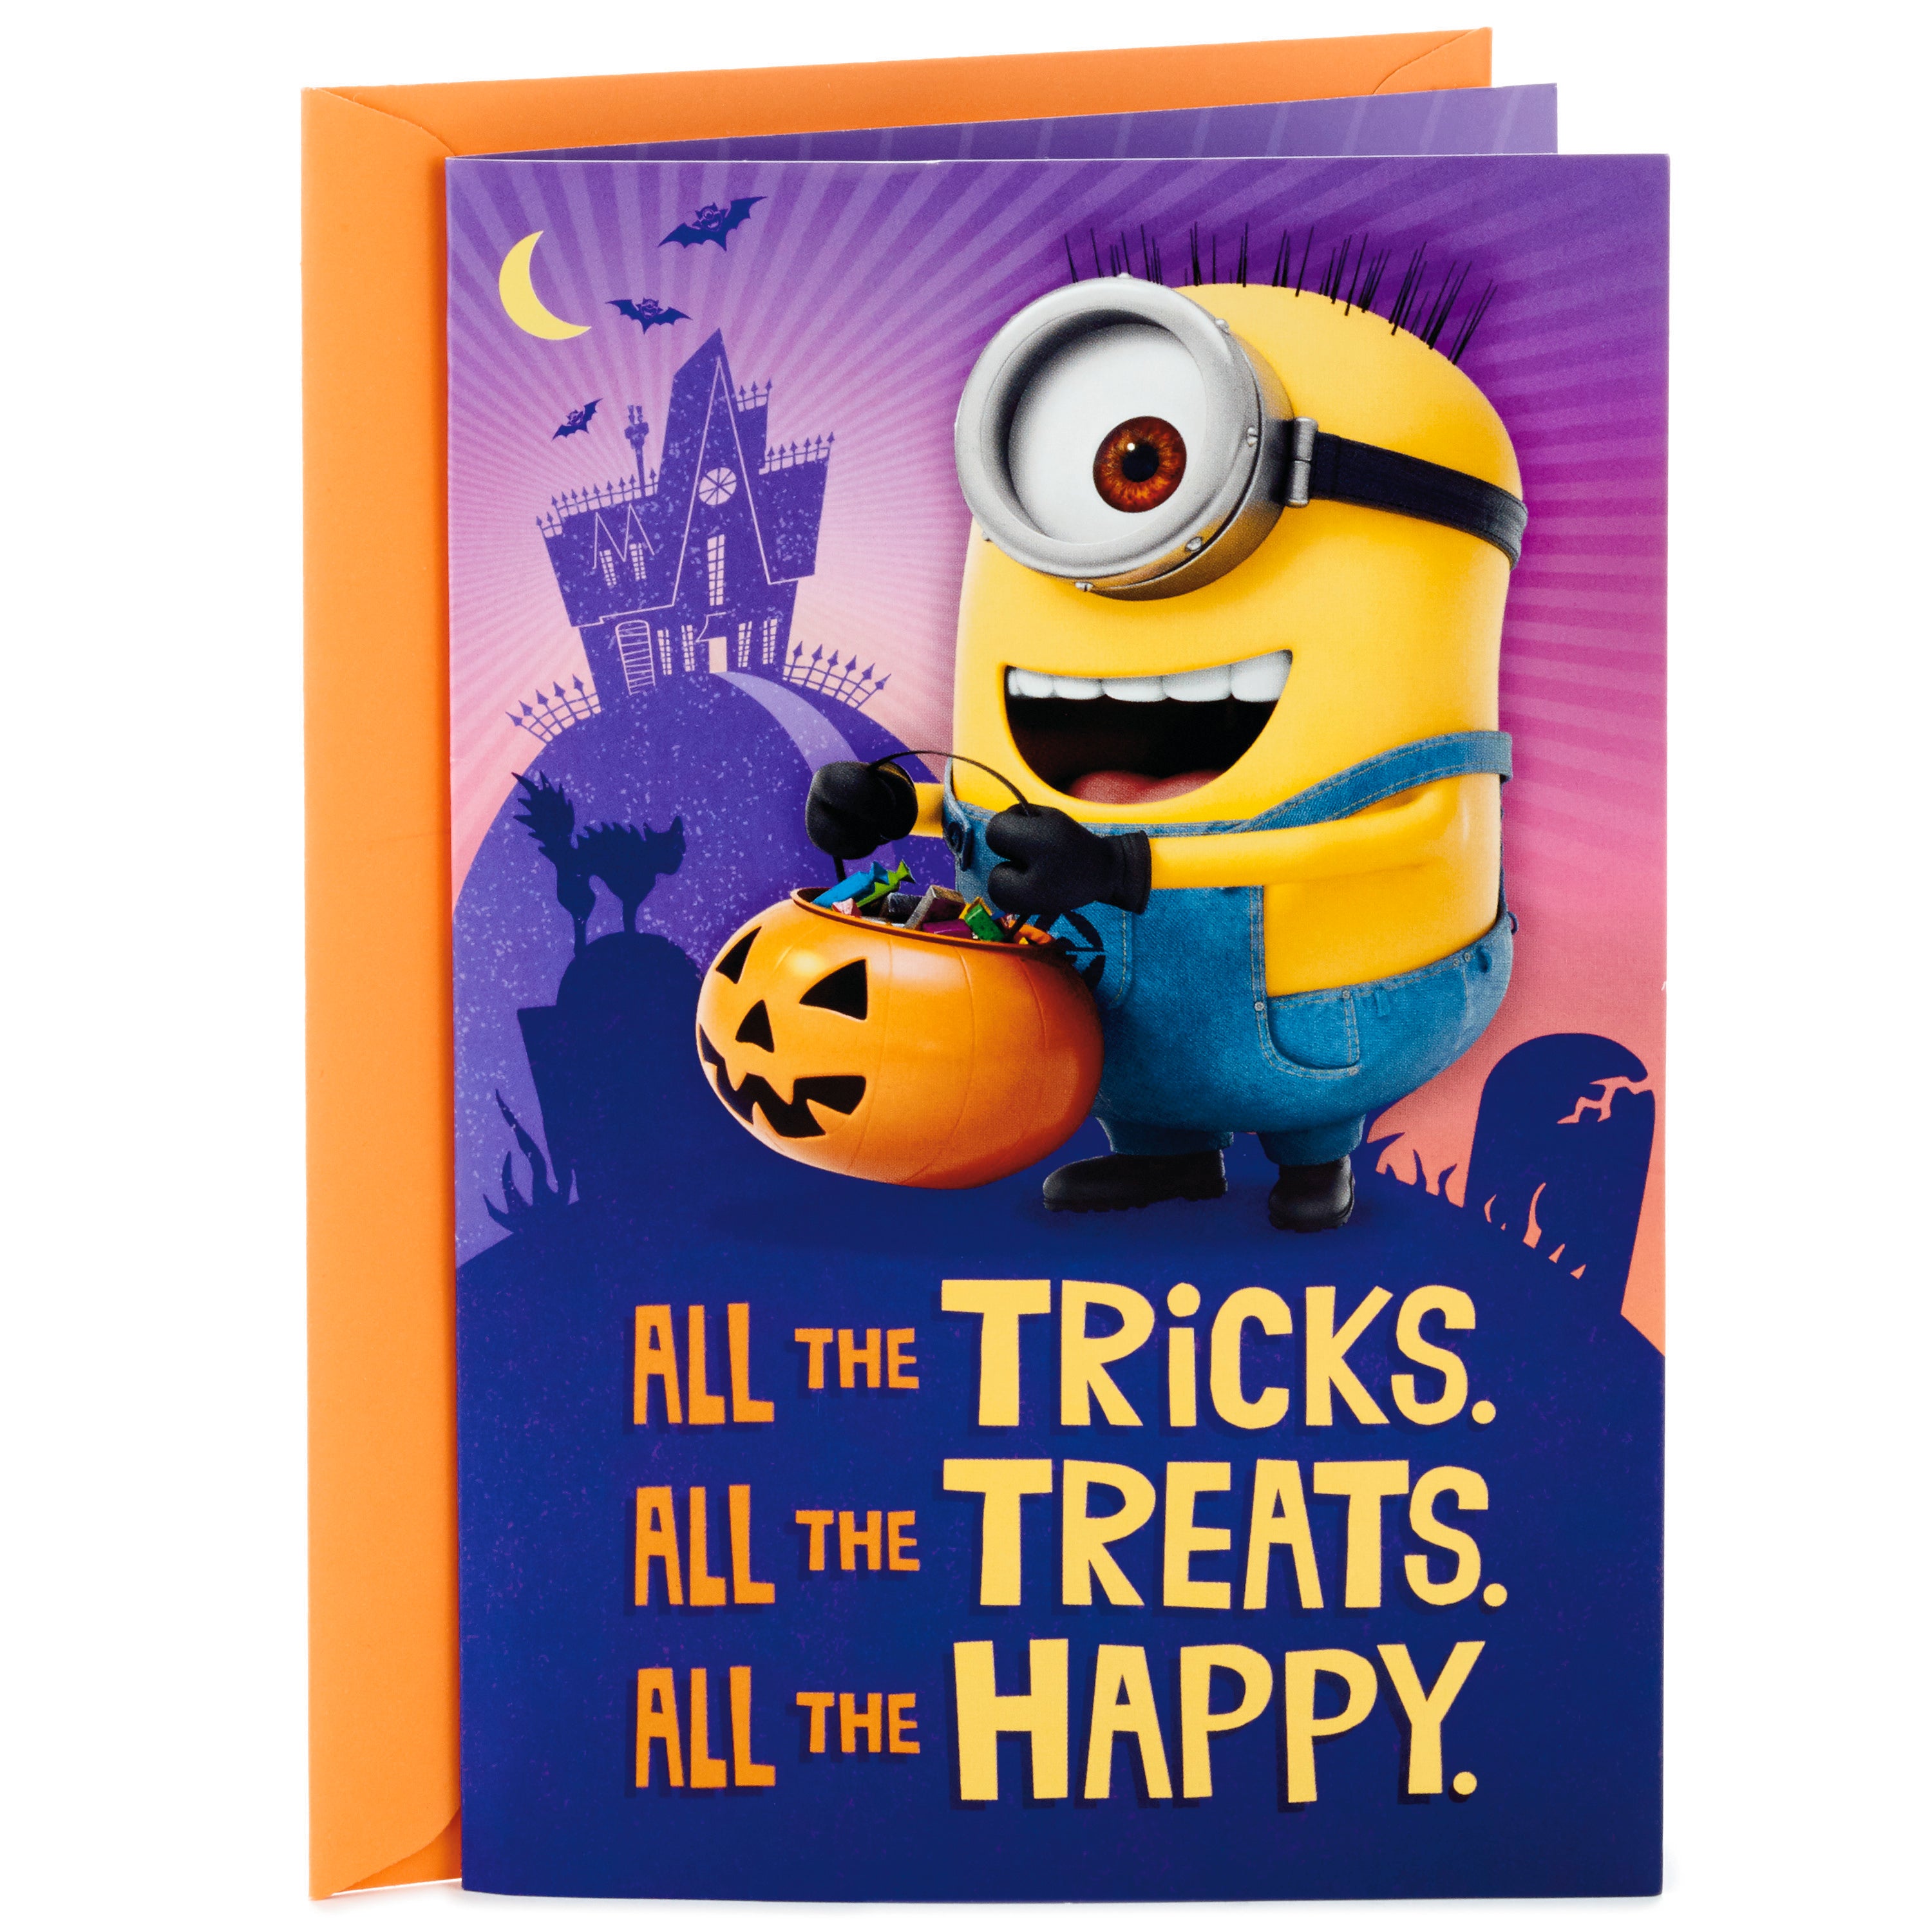  Minions Halloween Card with Song for Kids (Plays "Happy" by Pharrell Williams)